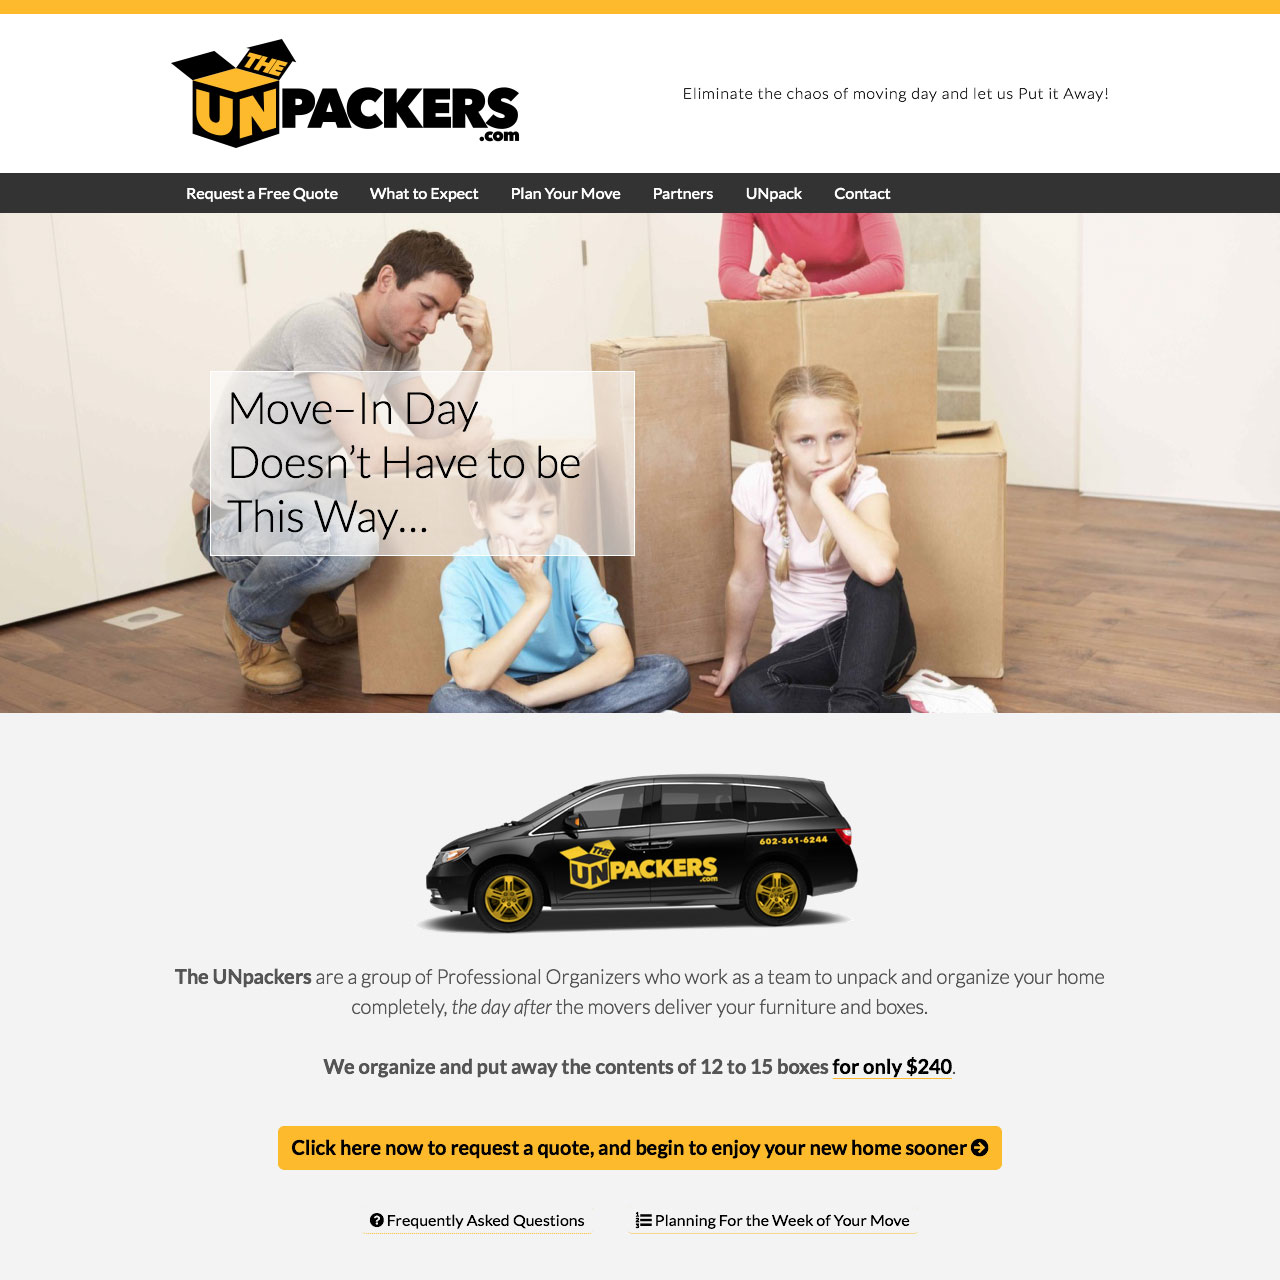 The UNpackers Homepage and Brand